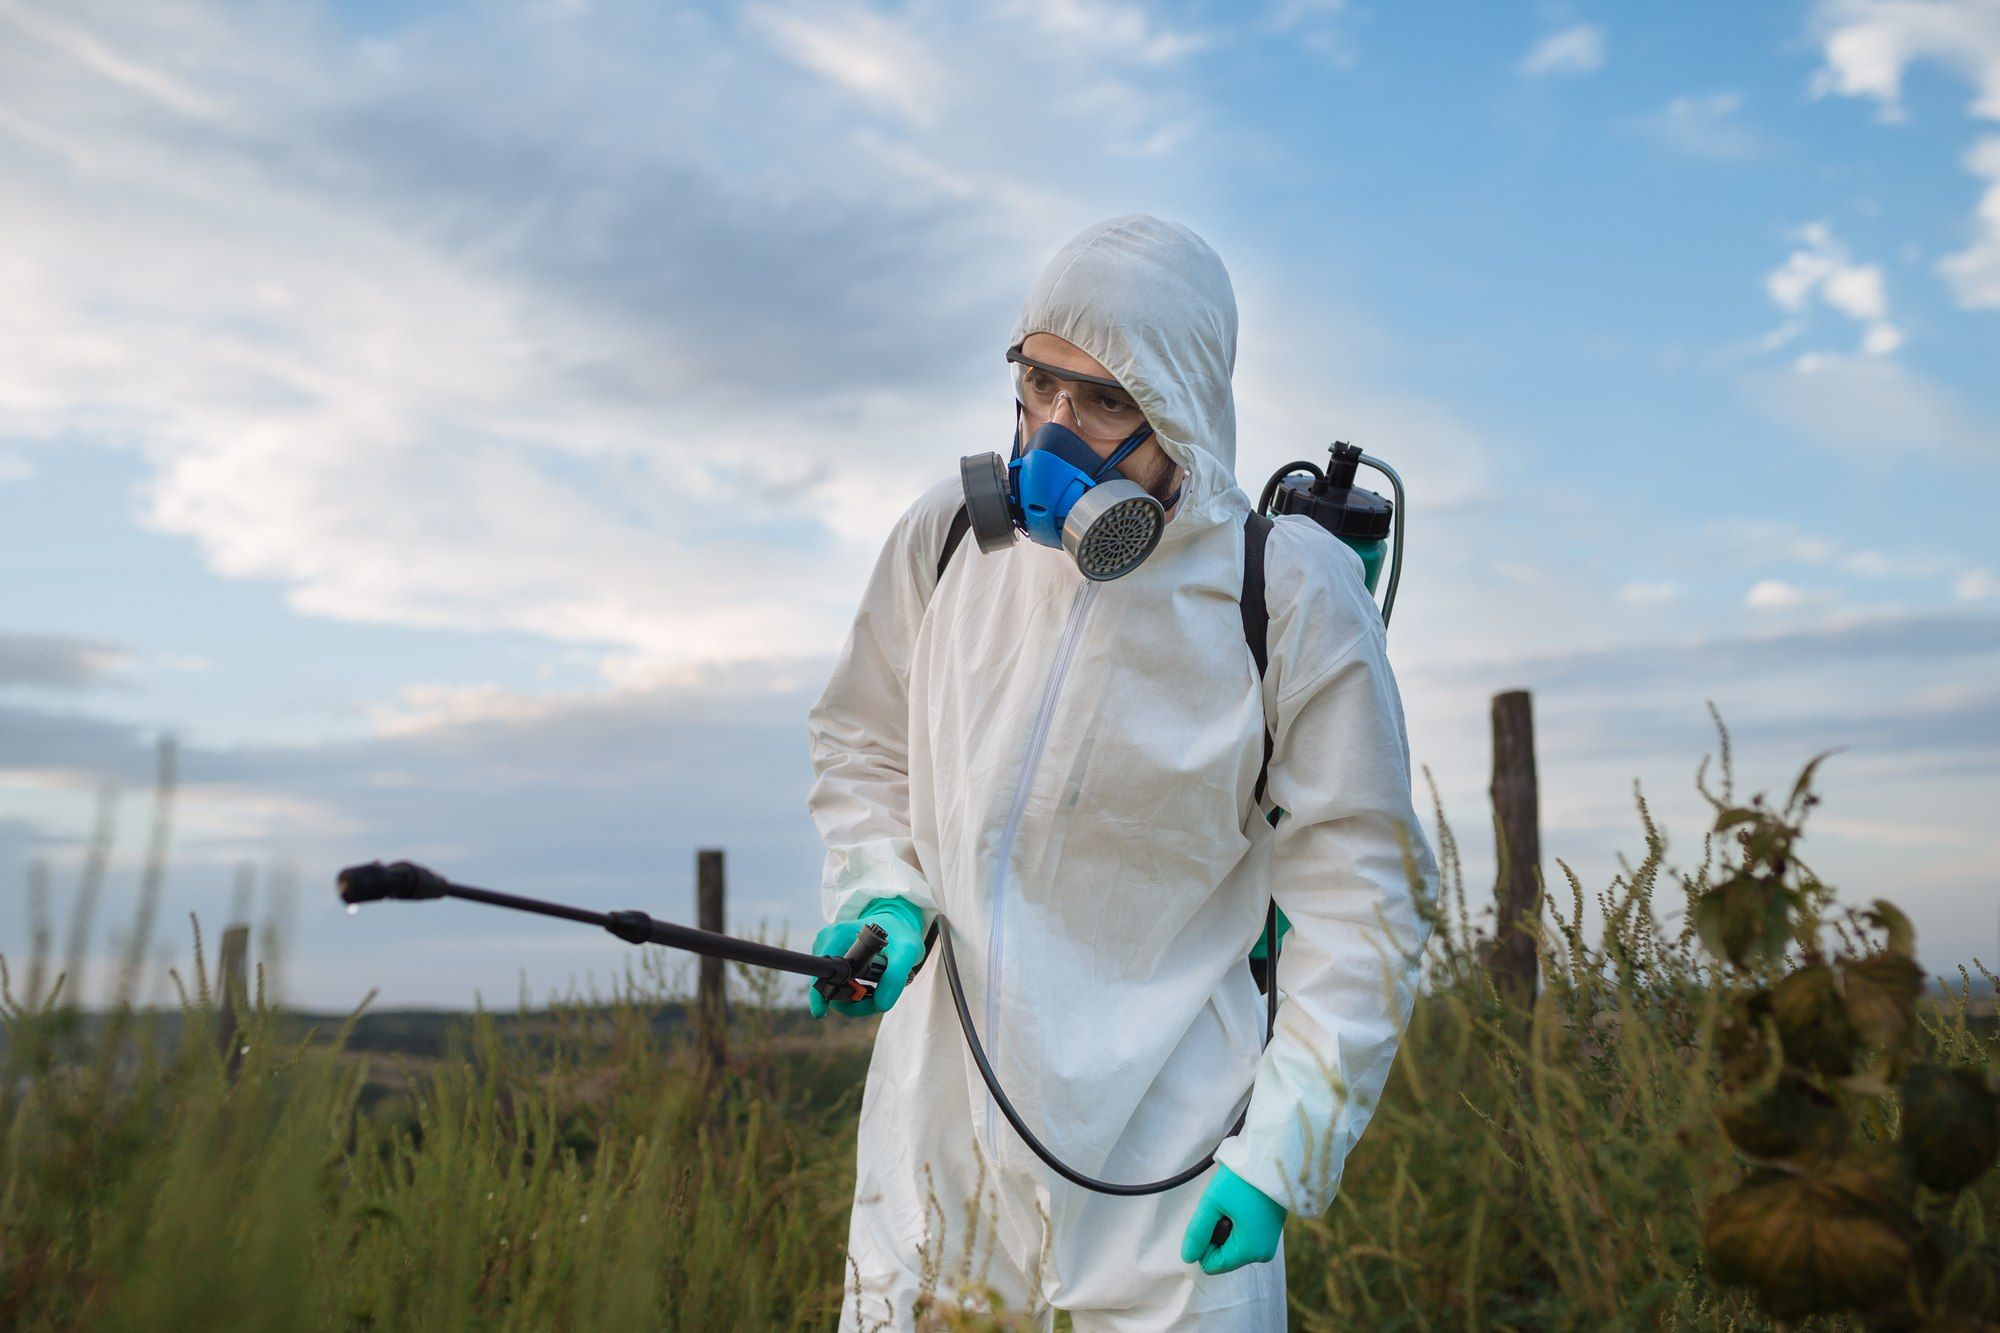 Is Roundup Harmful to Humans?